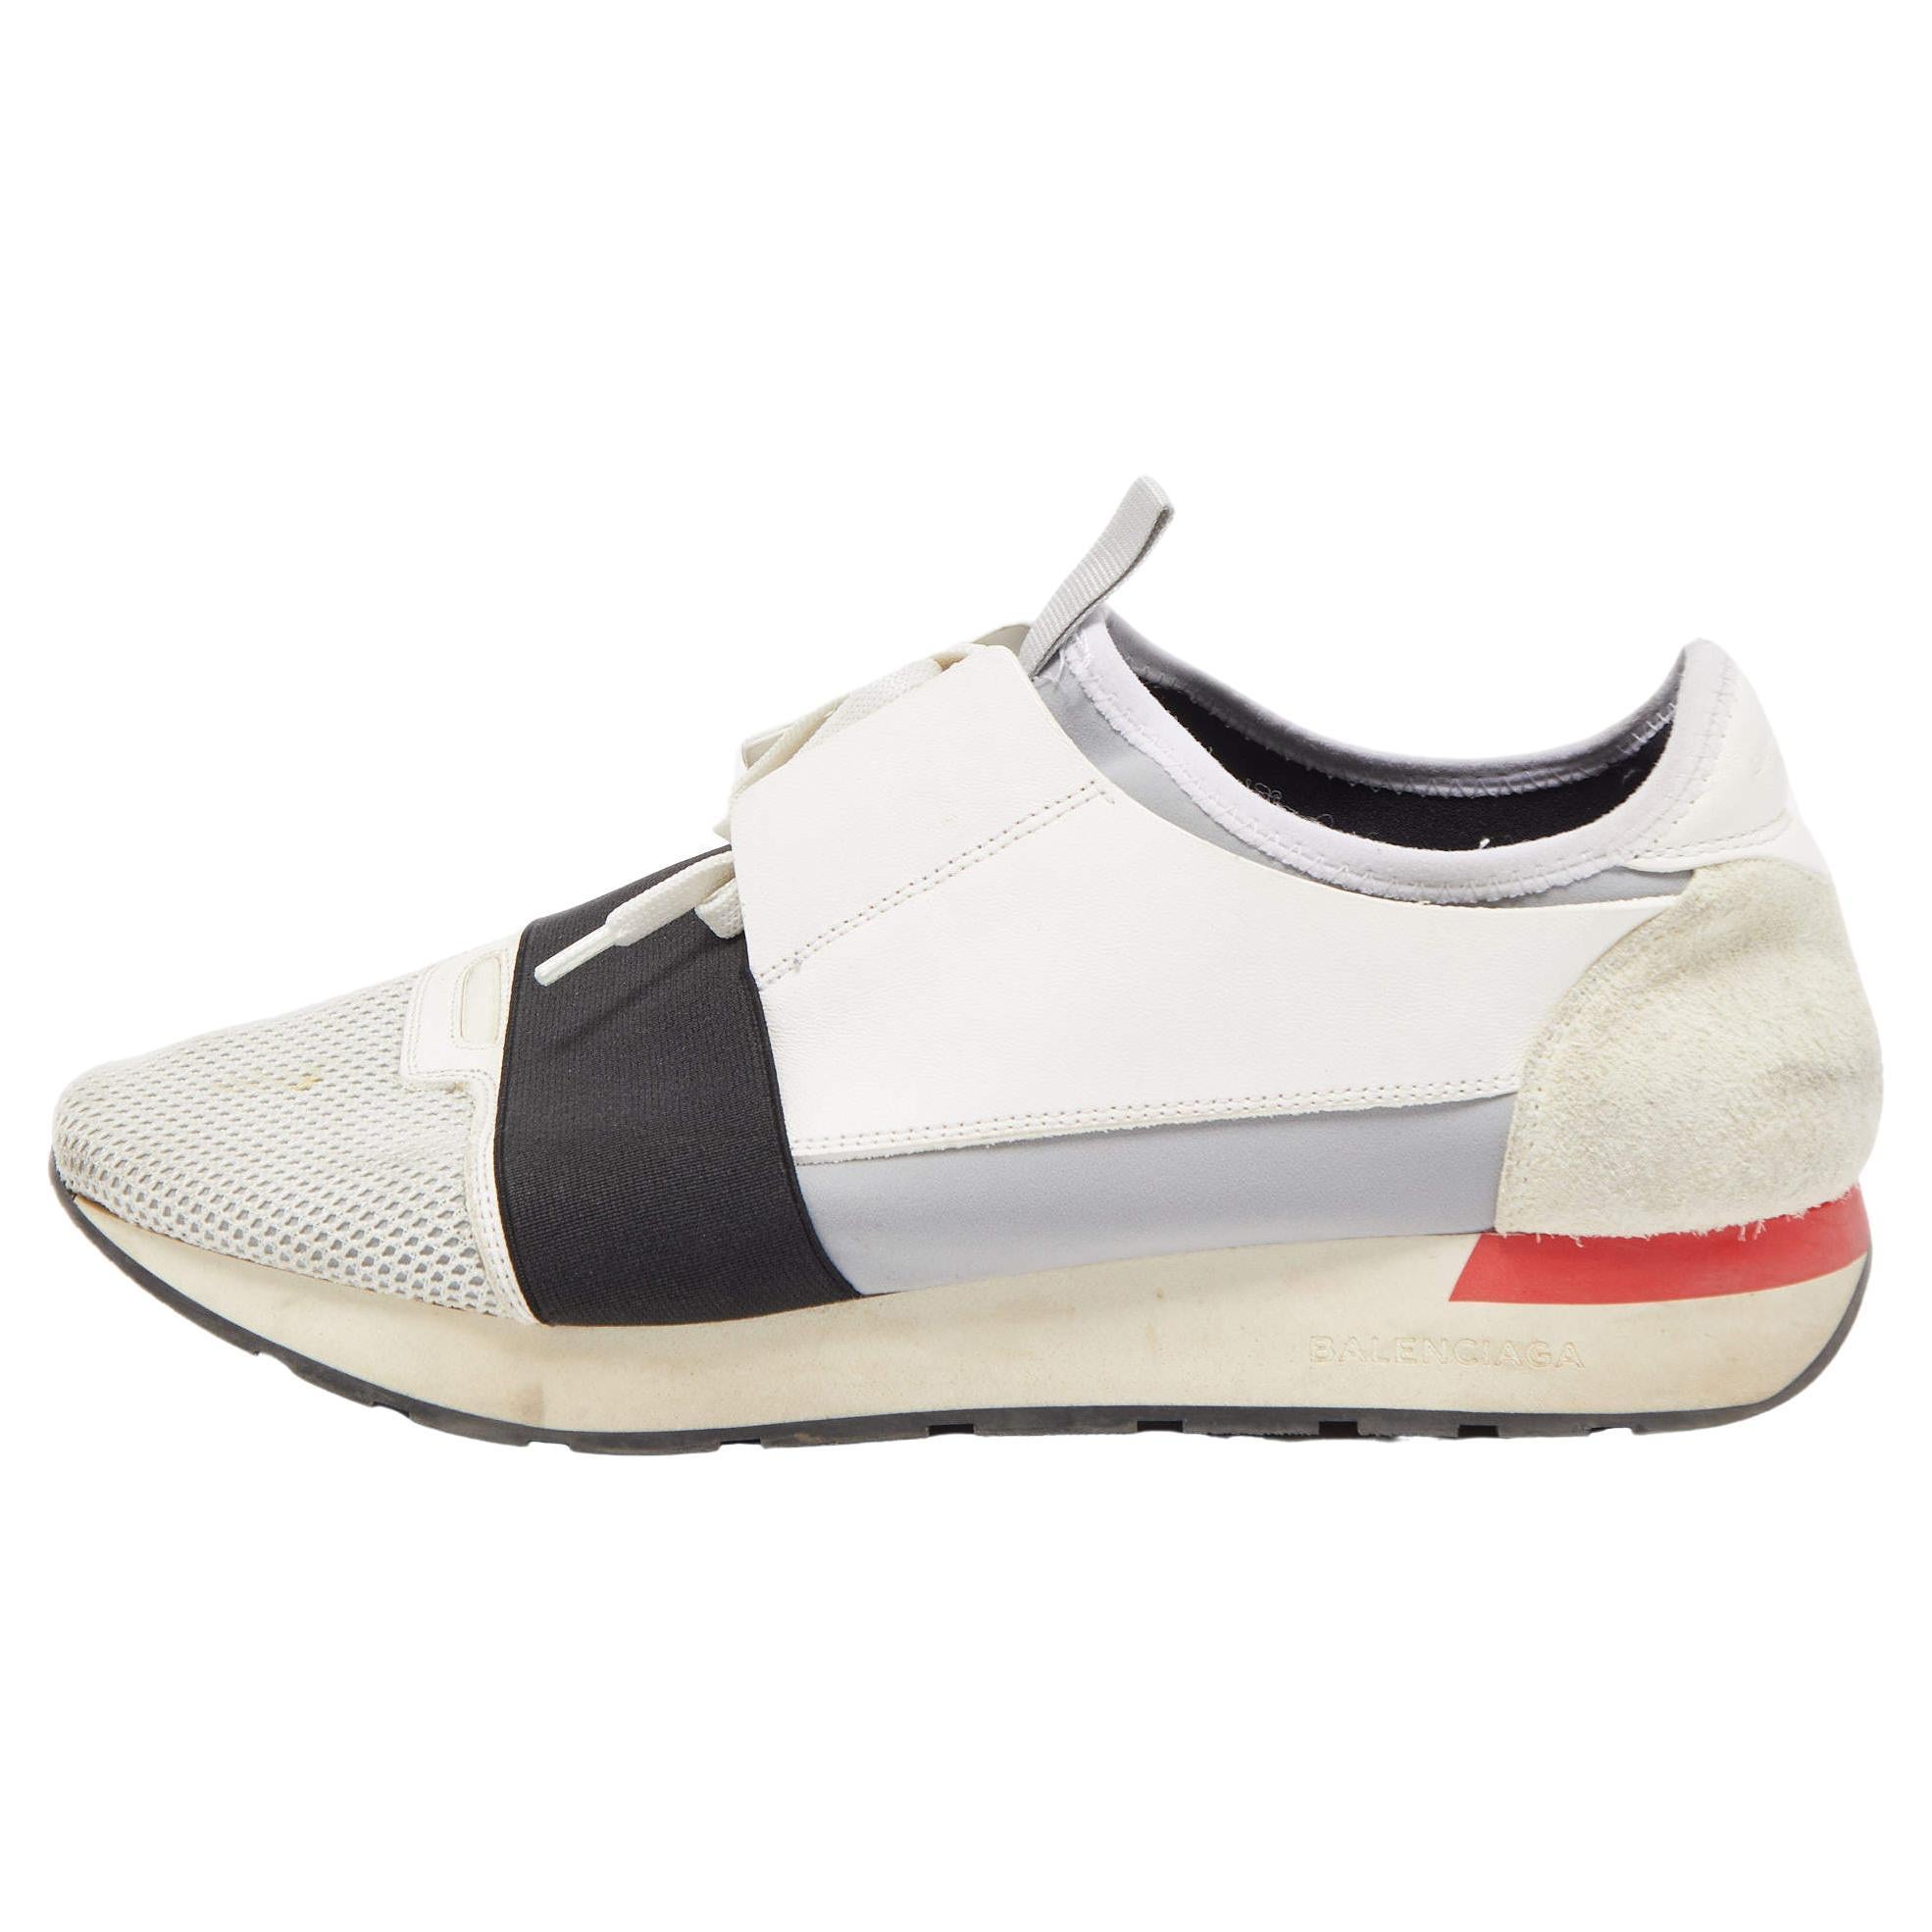 Balenciaga Tricolor Mesh and Leather Race Runner Sneakers Size 43 For Sale